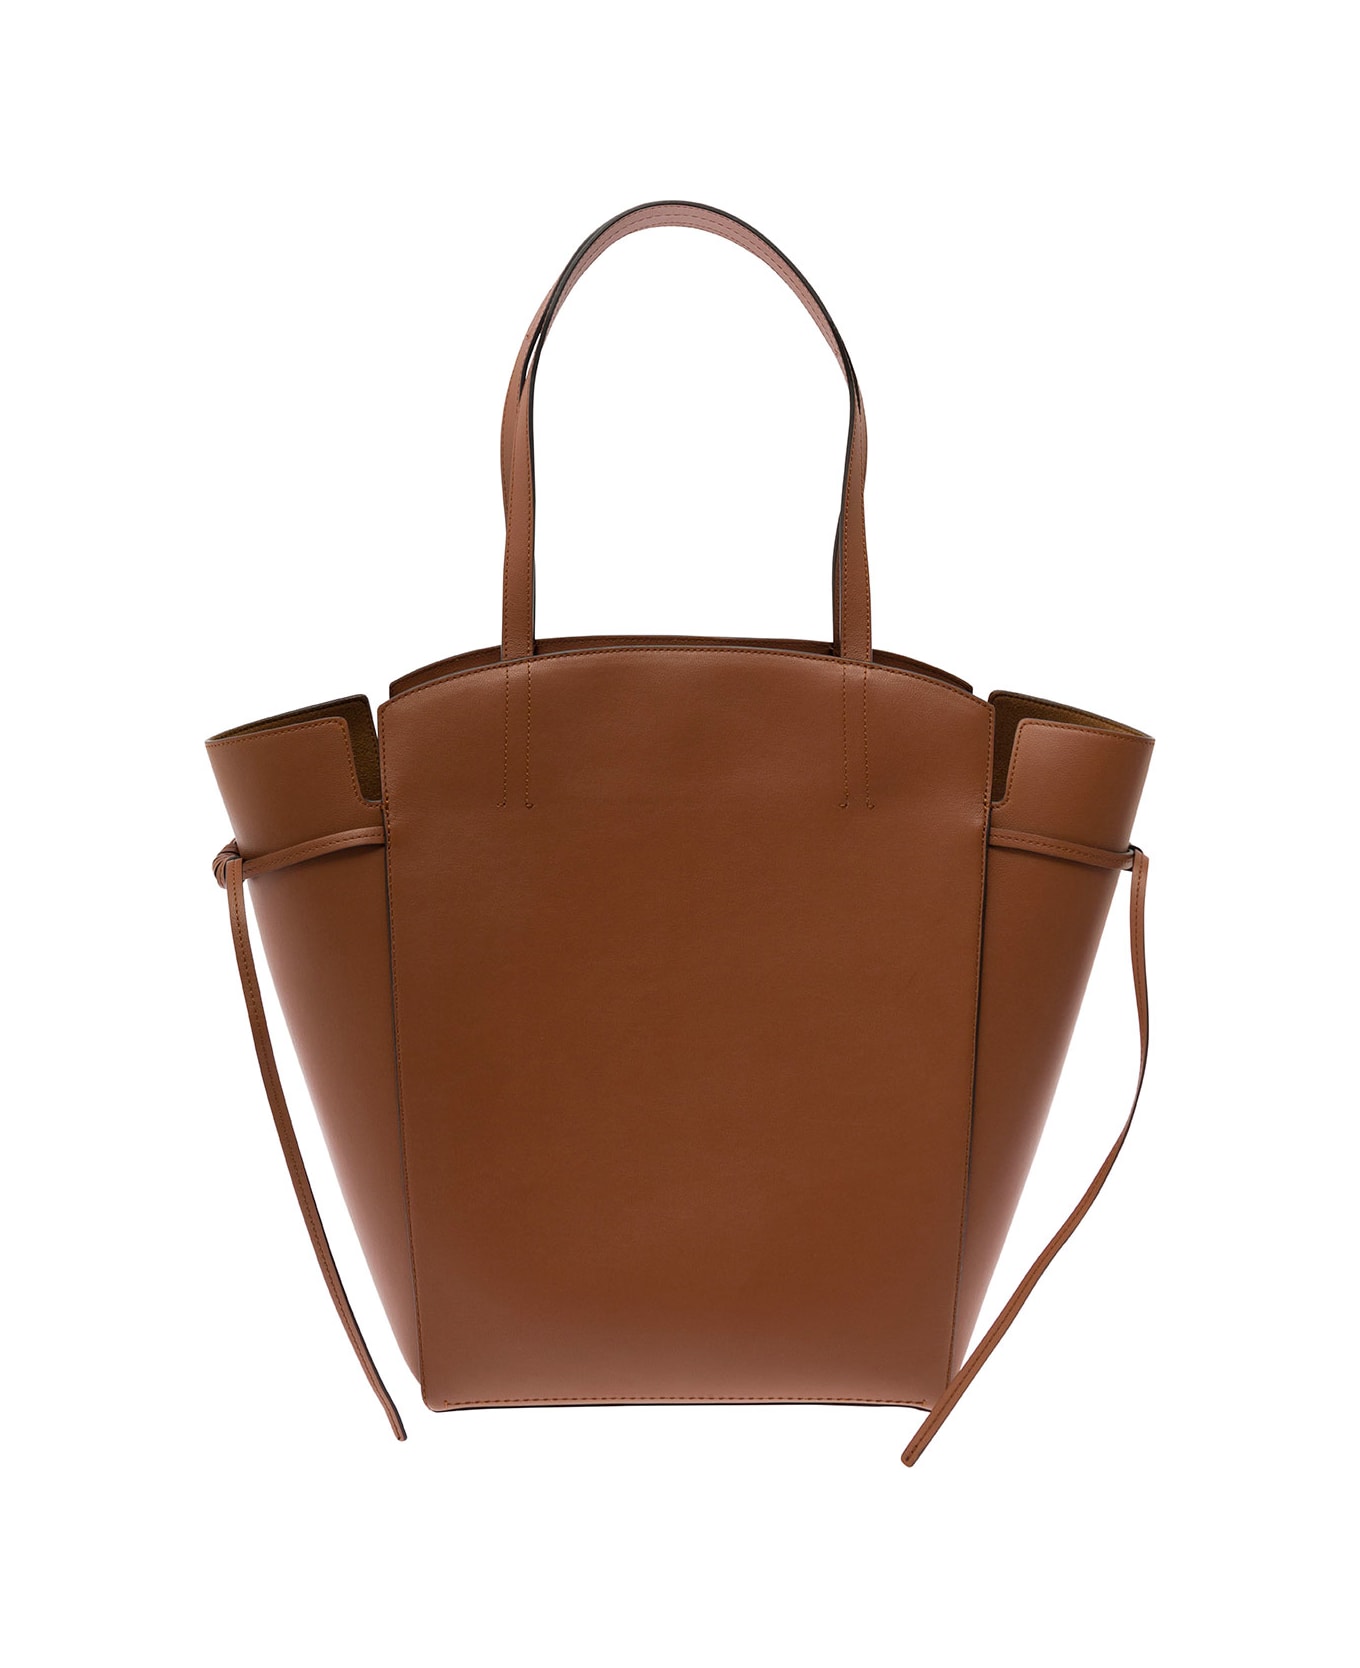 Mulberry 'clovelly' Brown Shoulder Bag With Laminated Logo In Smooth Leather Woman - Brown ショルダーバッグ